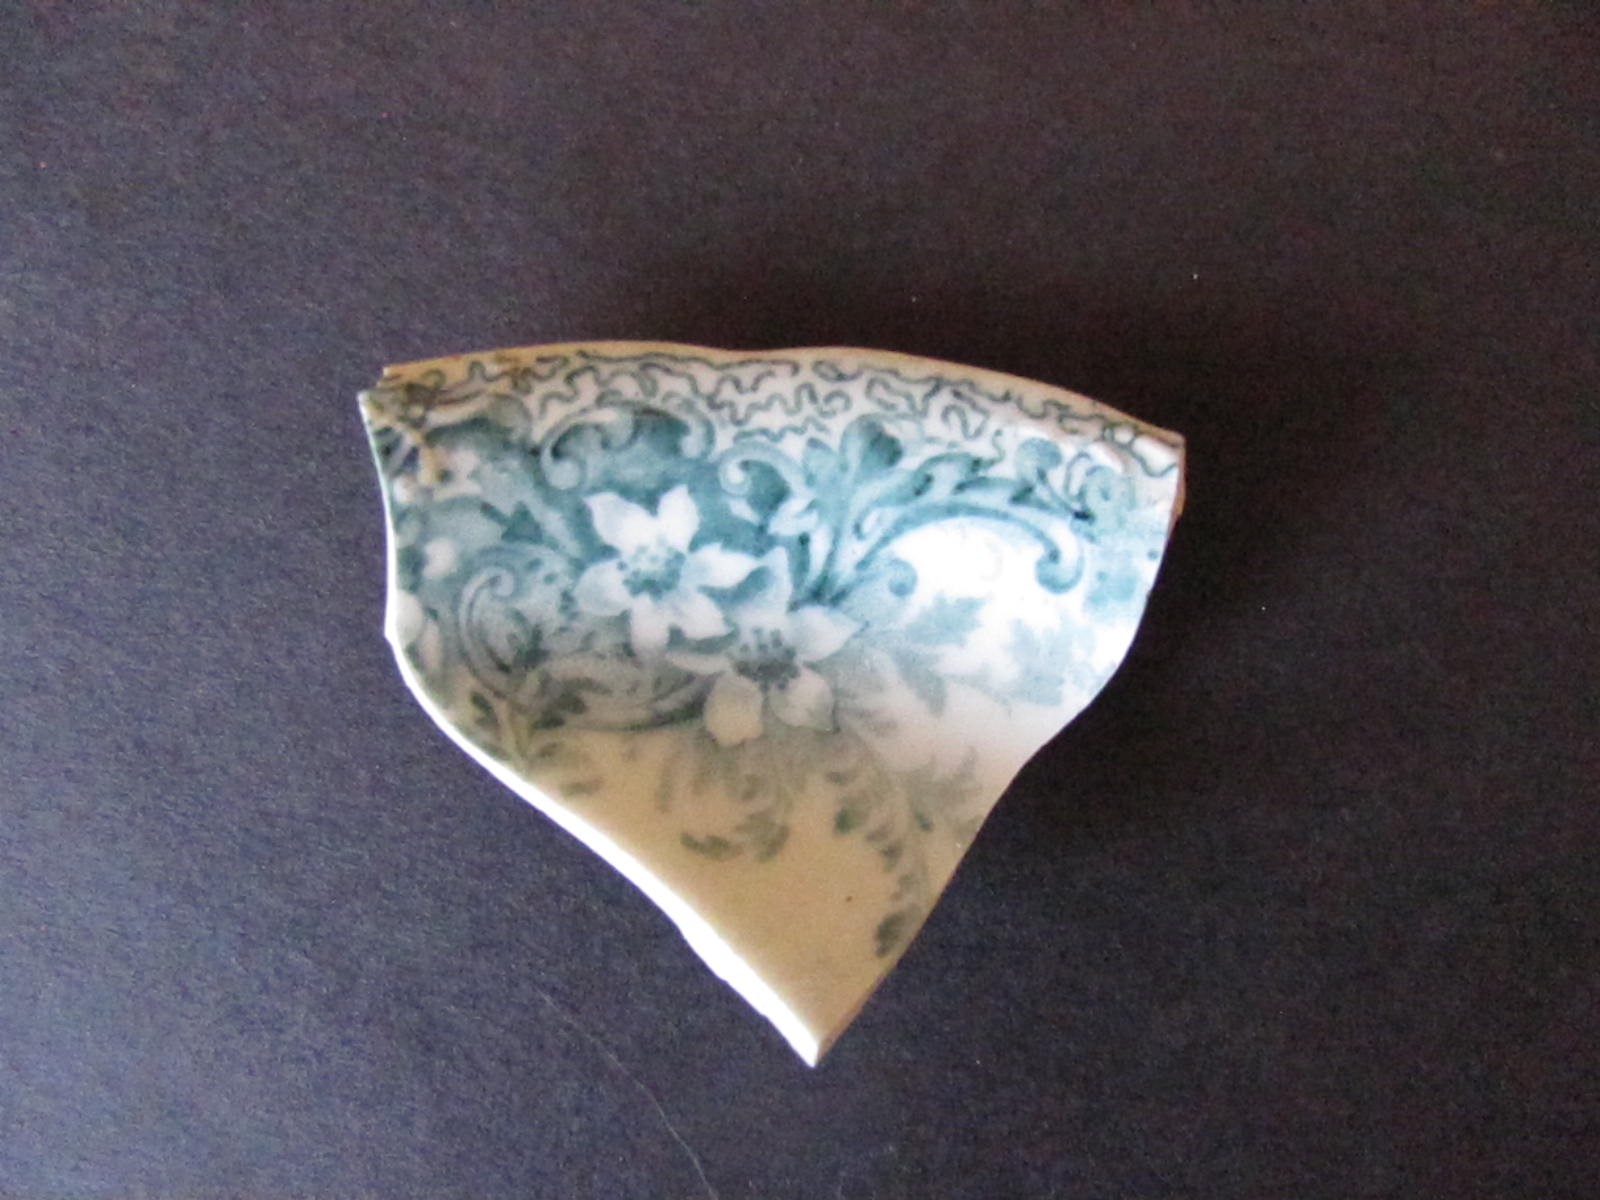 Teal pottery piece from 1818-1854